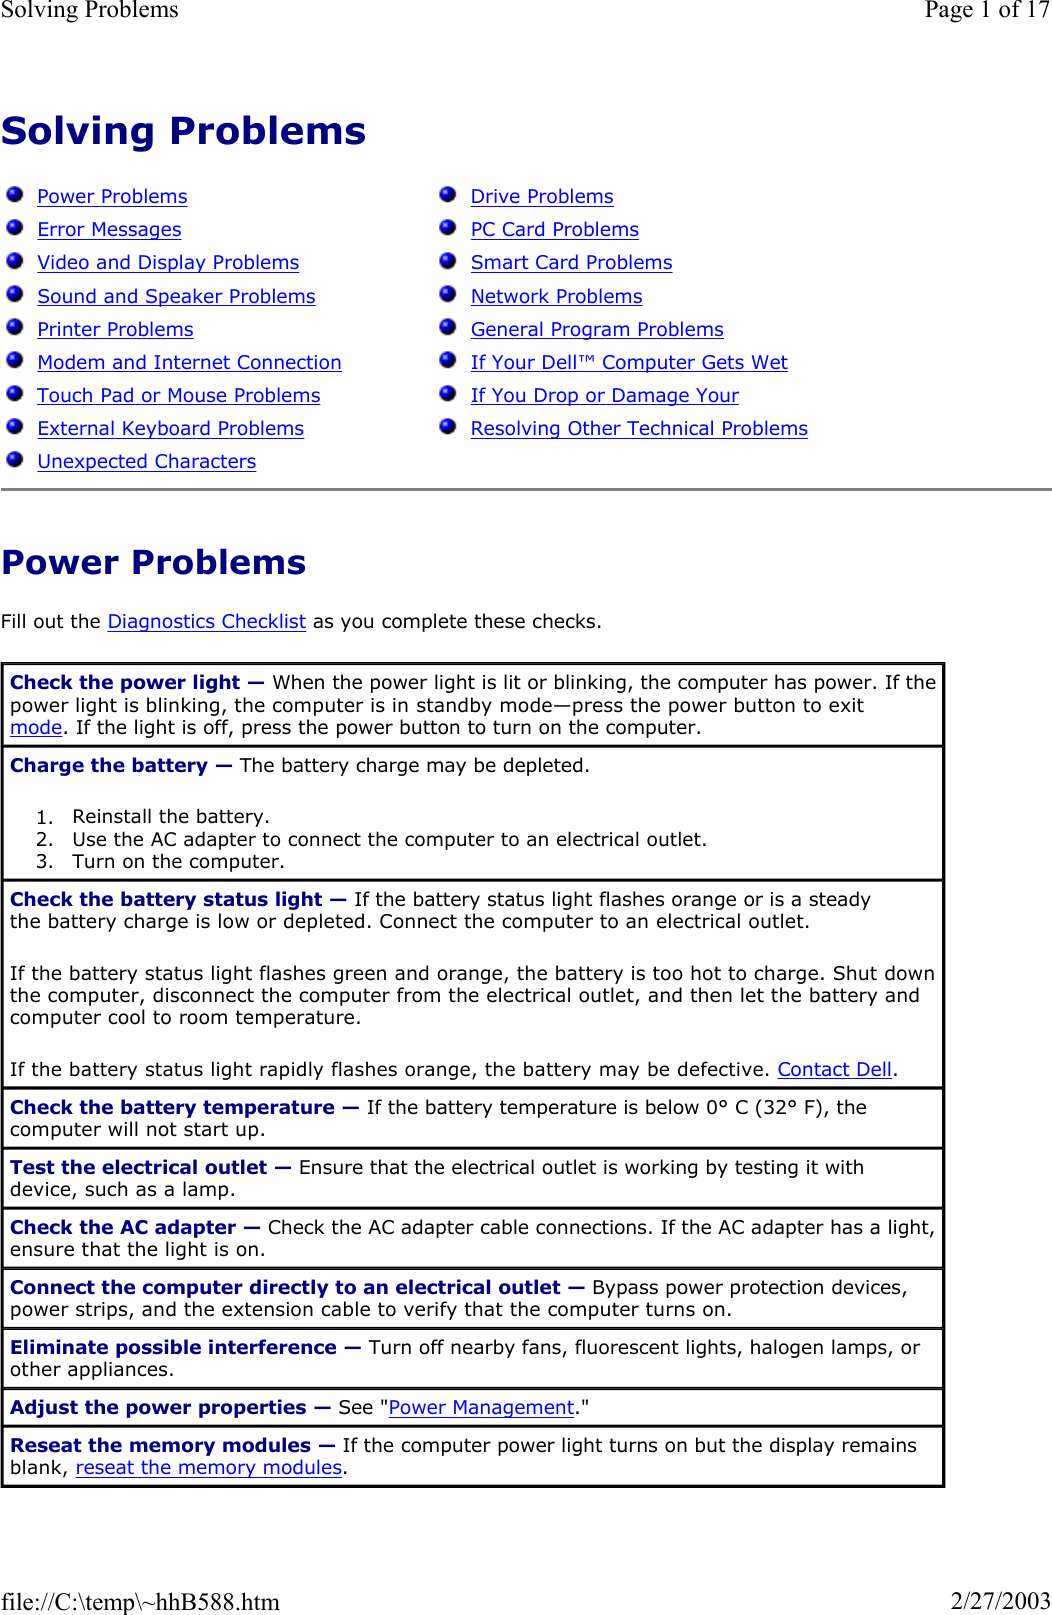 Solving ProblemsPower Problems Fill out the Diagnostics Checklist as you complete these checks. Power ProblemsError MessagesVideo and Display ProblemsSound and Speaker ProblemsPrinter ProblemsModem and Internet Connection Touch Pad or Mouse ProblemsExternal Keyboard ProblemsUnexpected CharactersDrive ProblemsPC Card ProblemsSmart Card ProblemsNetwork ProblemsGeneral Program ProblemsIf Your Dell™Computer Gets WetIf You Drop or Damage Your Resolving Other Technical ProblemsCheck the power light — When the power light is lit or blinking, the computer has power. If the power light is blinking, the computer is in standby mode—press the power button to exit mode. If the light is off, press the power button to turn on the computer. Charge the battery — The battery charge may be depleted. 1. Reinstall the battery.  2. Use the AC adapter to connect the computer to an electrical outlet.  3. Turn on the computer.  Check the battery status light — If the battery status light flashes orange or is a steady the battery charge is low or depleted. Connect the computer to an electrical outlet. If the battery status light flashes green and orange, the battery is too hot to charge. Shut down the computer, disconnect the computer from the electrical outlet, and then let the battery and computer cool to room temperature. If the battery status light rapidly flashes orange, the battery may be defective. Contact Dell.Check the battery temperature — If the battery temperature is below 0° C (32° F), the computer will not start up. Test the electrical outlet — Ensure that the electrical outlet is working by testing it with device, such as a lamp. Check the AC adapter — Check the AC adapter cable connections. If the AC adapter has a light, ensure that the light is on. Connect the computer directly to an electrical outlet — Bypass power protection devices, power strips, and the extension cable to verify that the computer turns on. Eliminate possible interference — Turn off nearby fans, fluorescent lights, halogen lamps, or other appliances. Adjust the power properties — See &quot;Power Management.&quot;Reseat the memory modules — If the computer power light turns on but the display remains blank, reseat the memory modules.Page 1 of 17Solving Problems2/27/2003file://C:\temp\~hhB588.htm